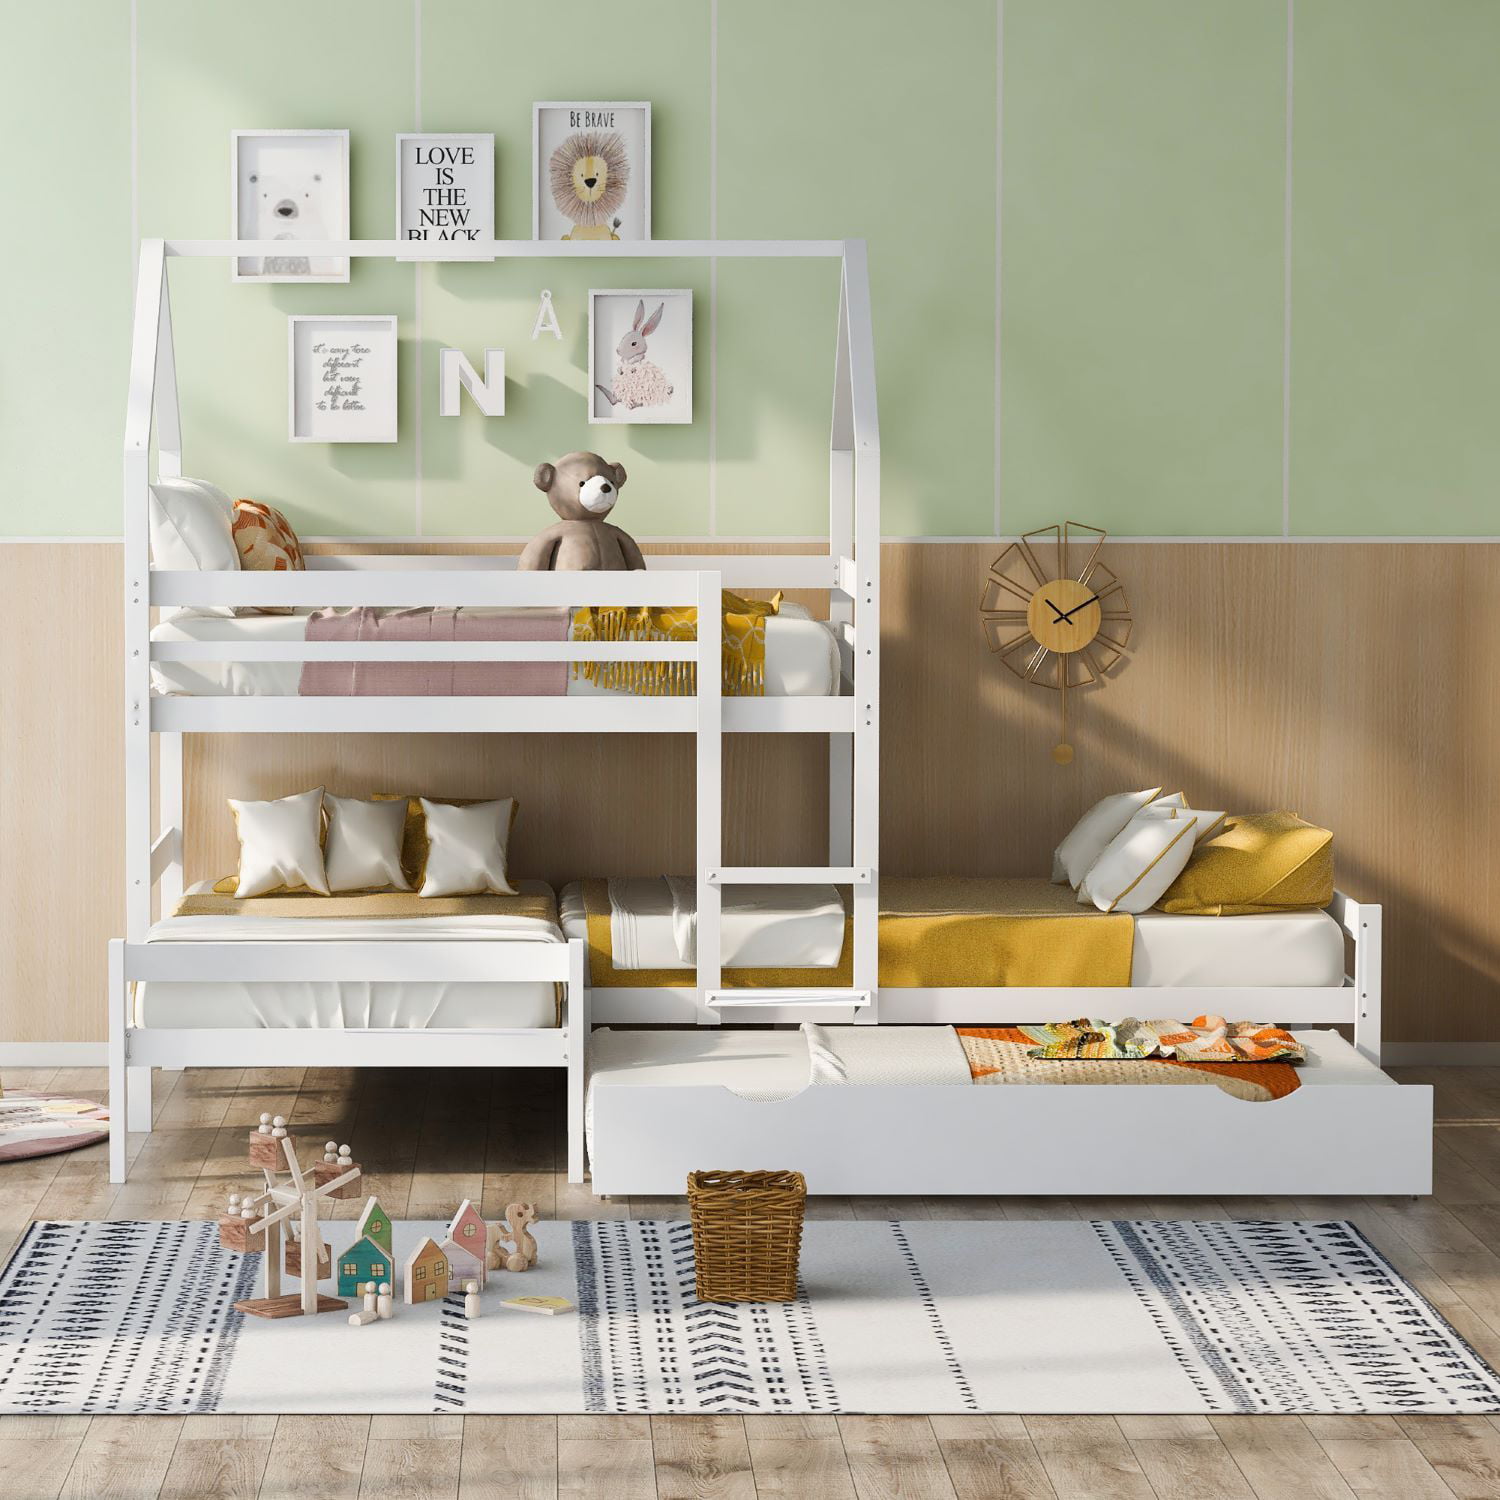 Carefree 4 Bunk Beds For Kids House Bed, Bunk Beds For 4 Kids